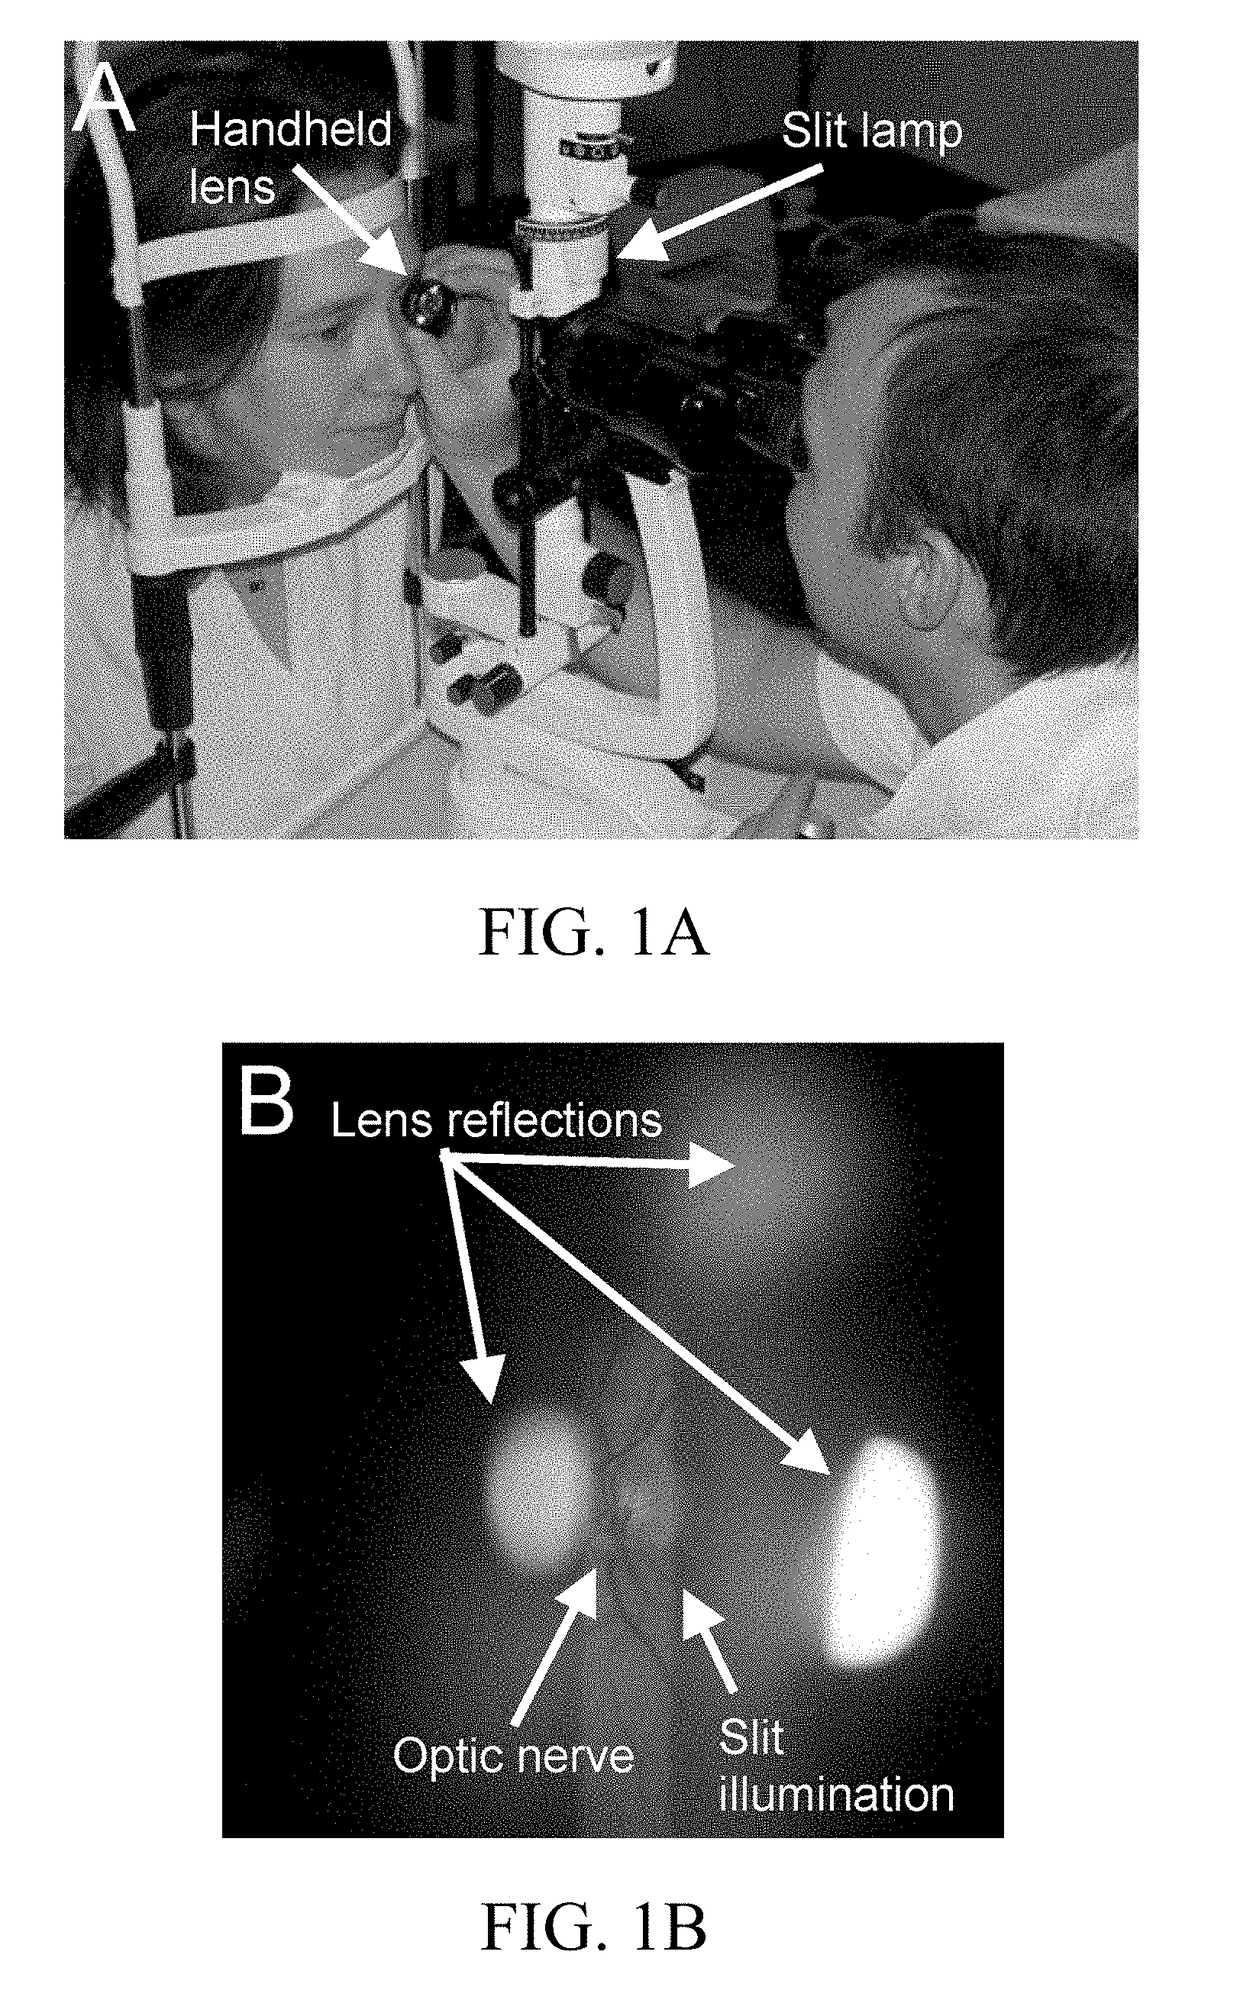 Self-Illuminated Handheld Lens for Retinal Examination and Photography and Related Method thereof